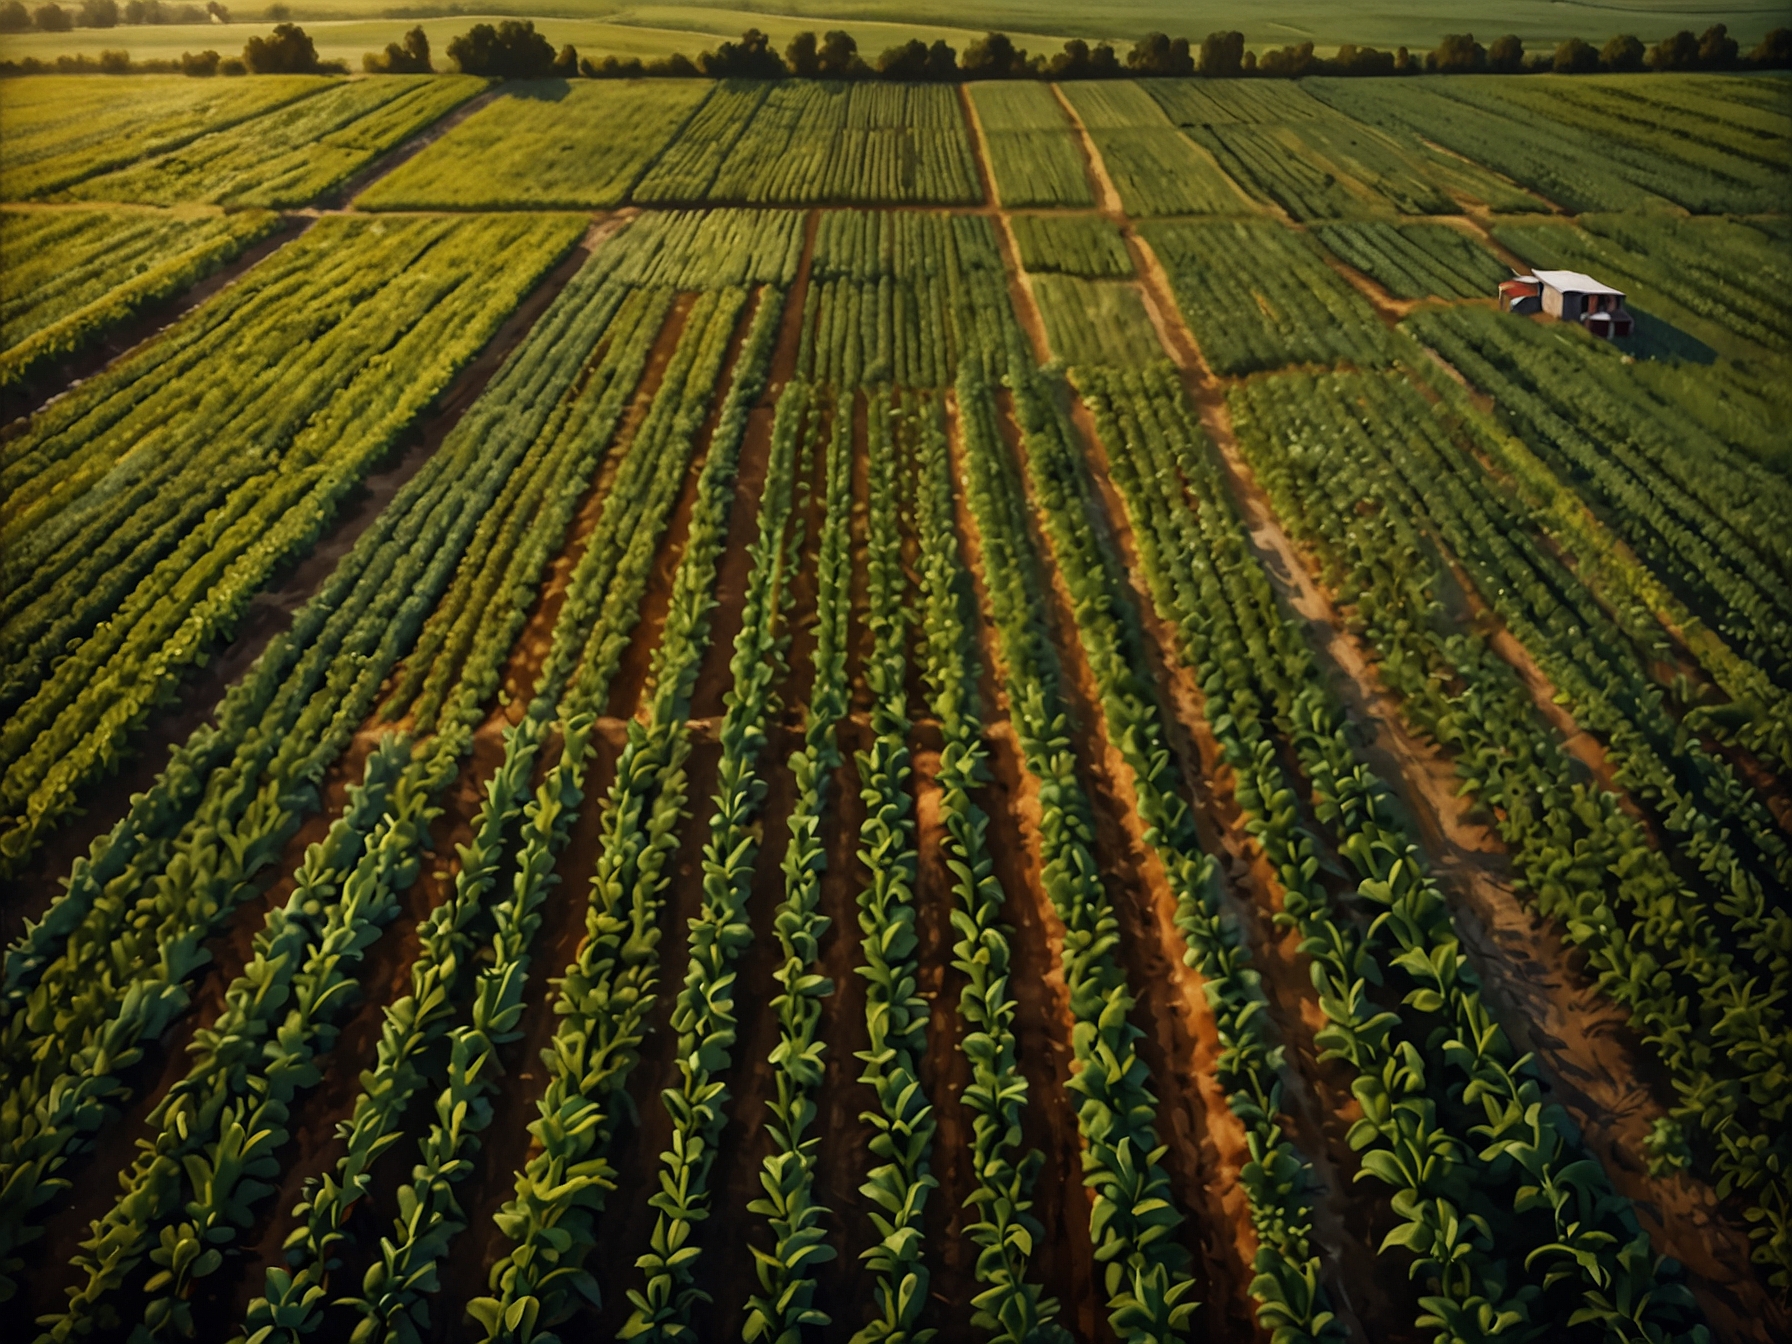 An aerial view of flourishing soybean fields in America's heartland, showcasing the crop's extensive cultivation and the advanced farming technologies employed by dedicated farmers.